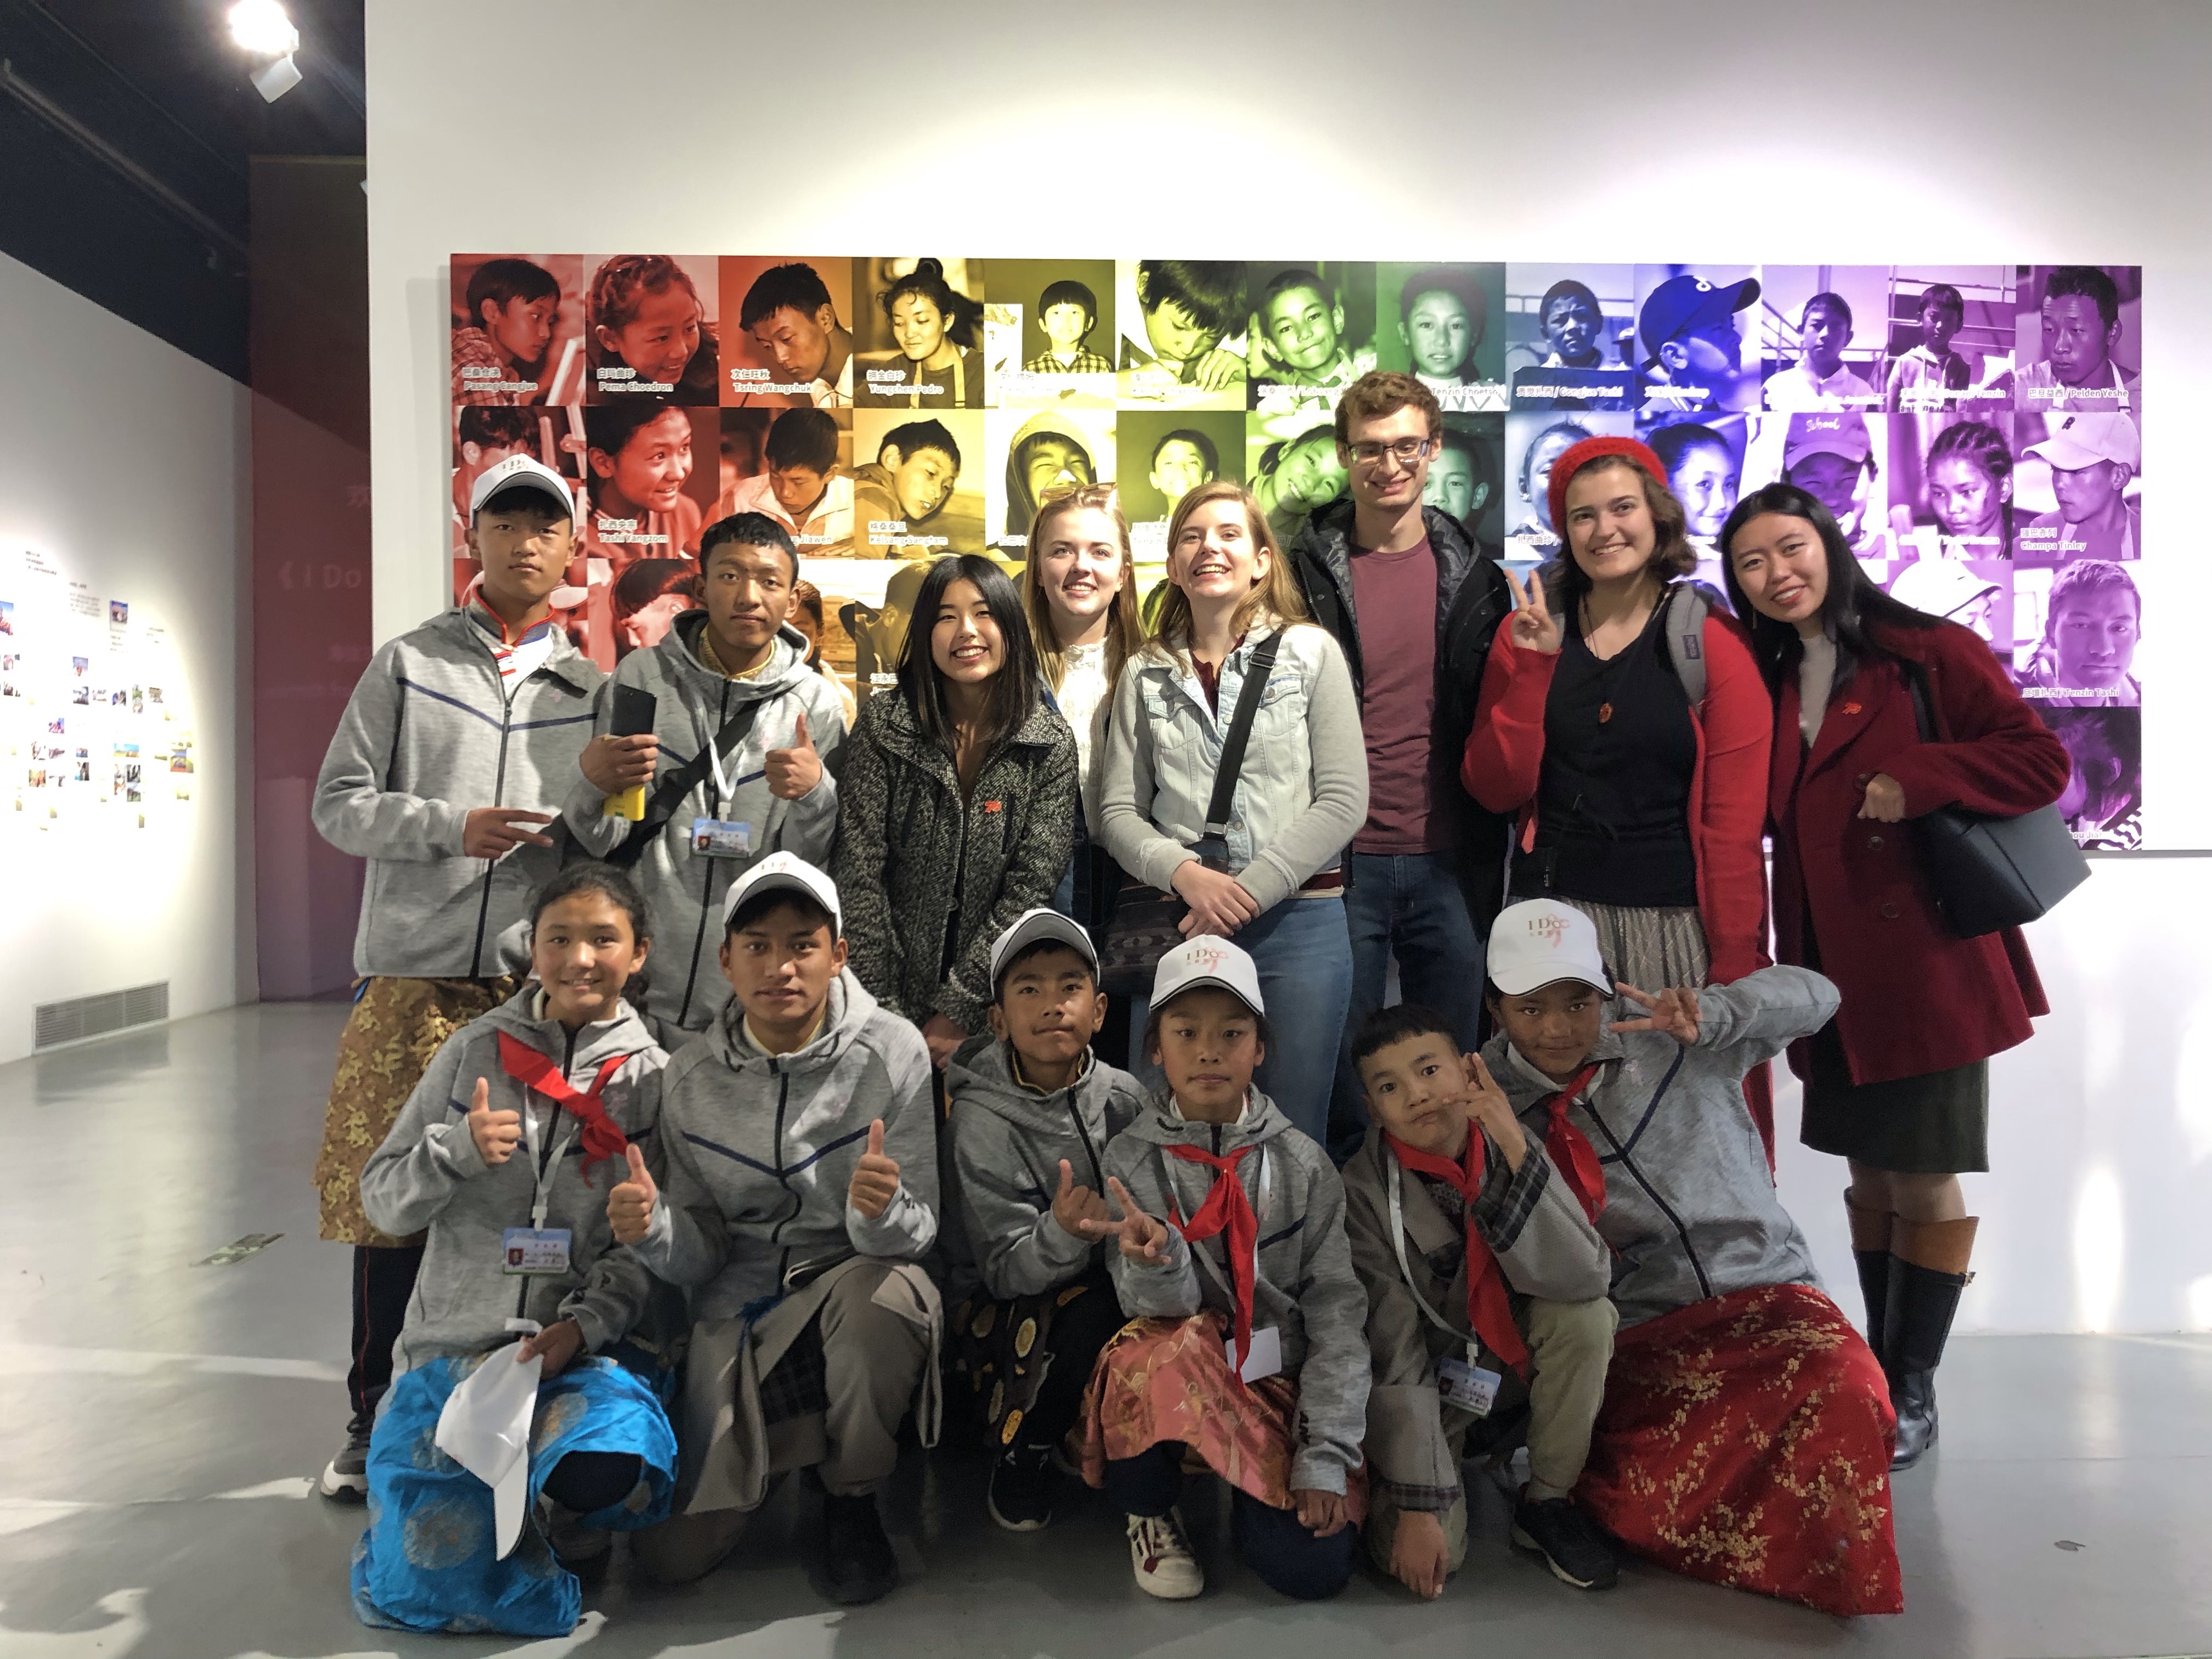 Friends and I with the Tibetan students of the I Do Foundation in front of an exhibit.